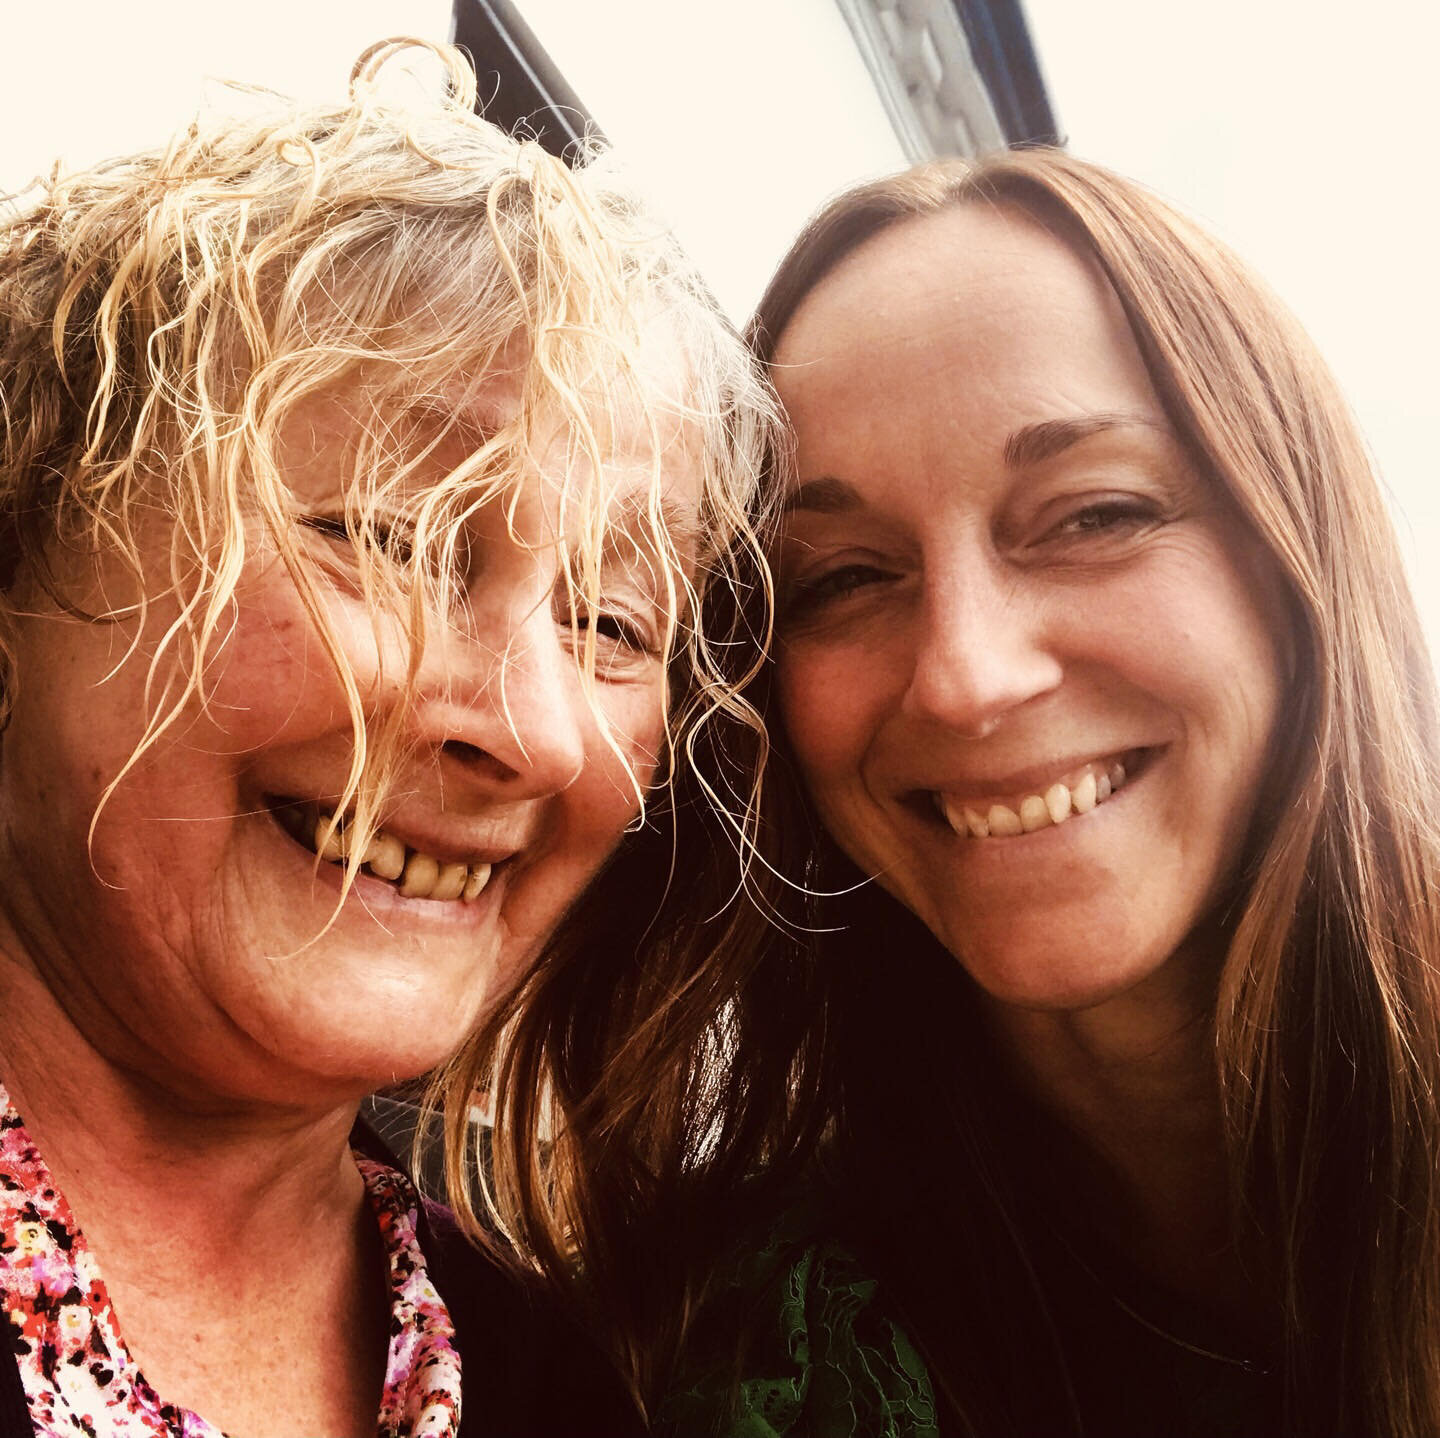 This is me &amp; my mum 💞💞
We are both Well-Woman Yogini&rsquo;s 🧘&zwj;♀️ 
My mum is post-menopausal &amp; I&rsquo;m peri-menopausal. My Well-Woman Yoga Classes are designed for women that are at all stages of the menopause. 
This terms classes ar